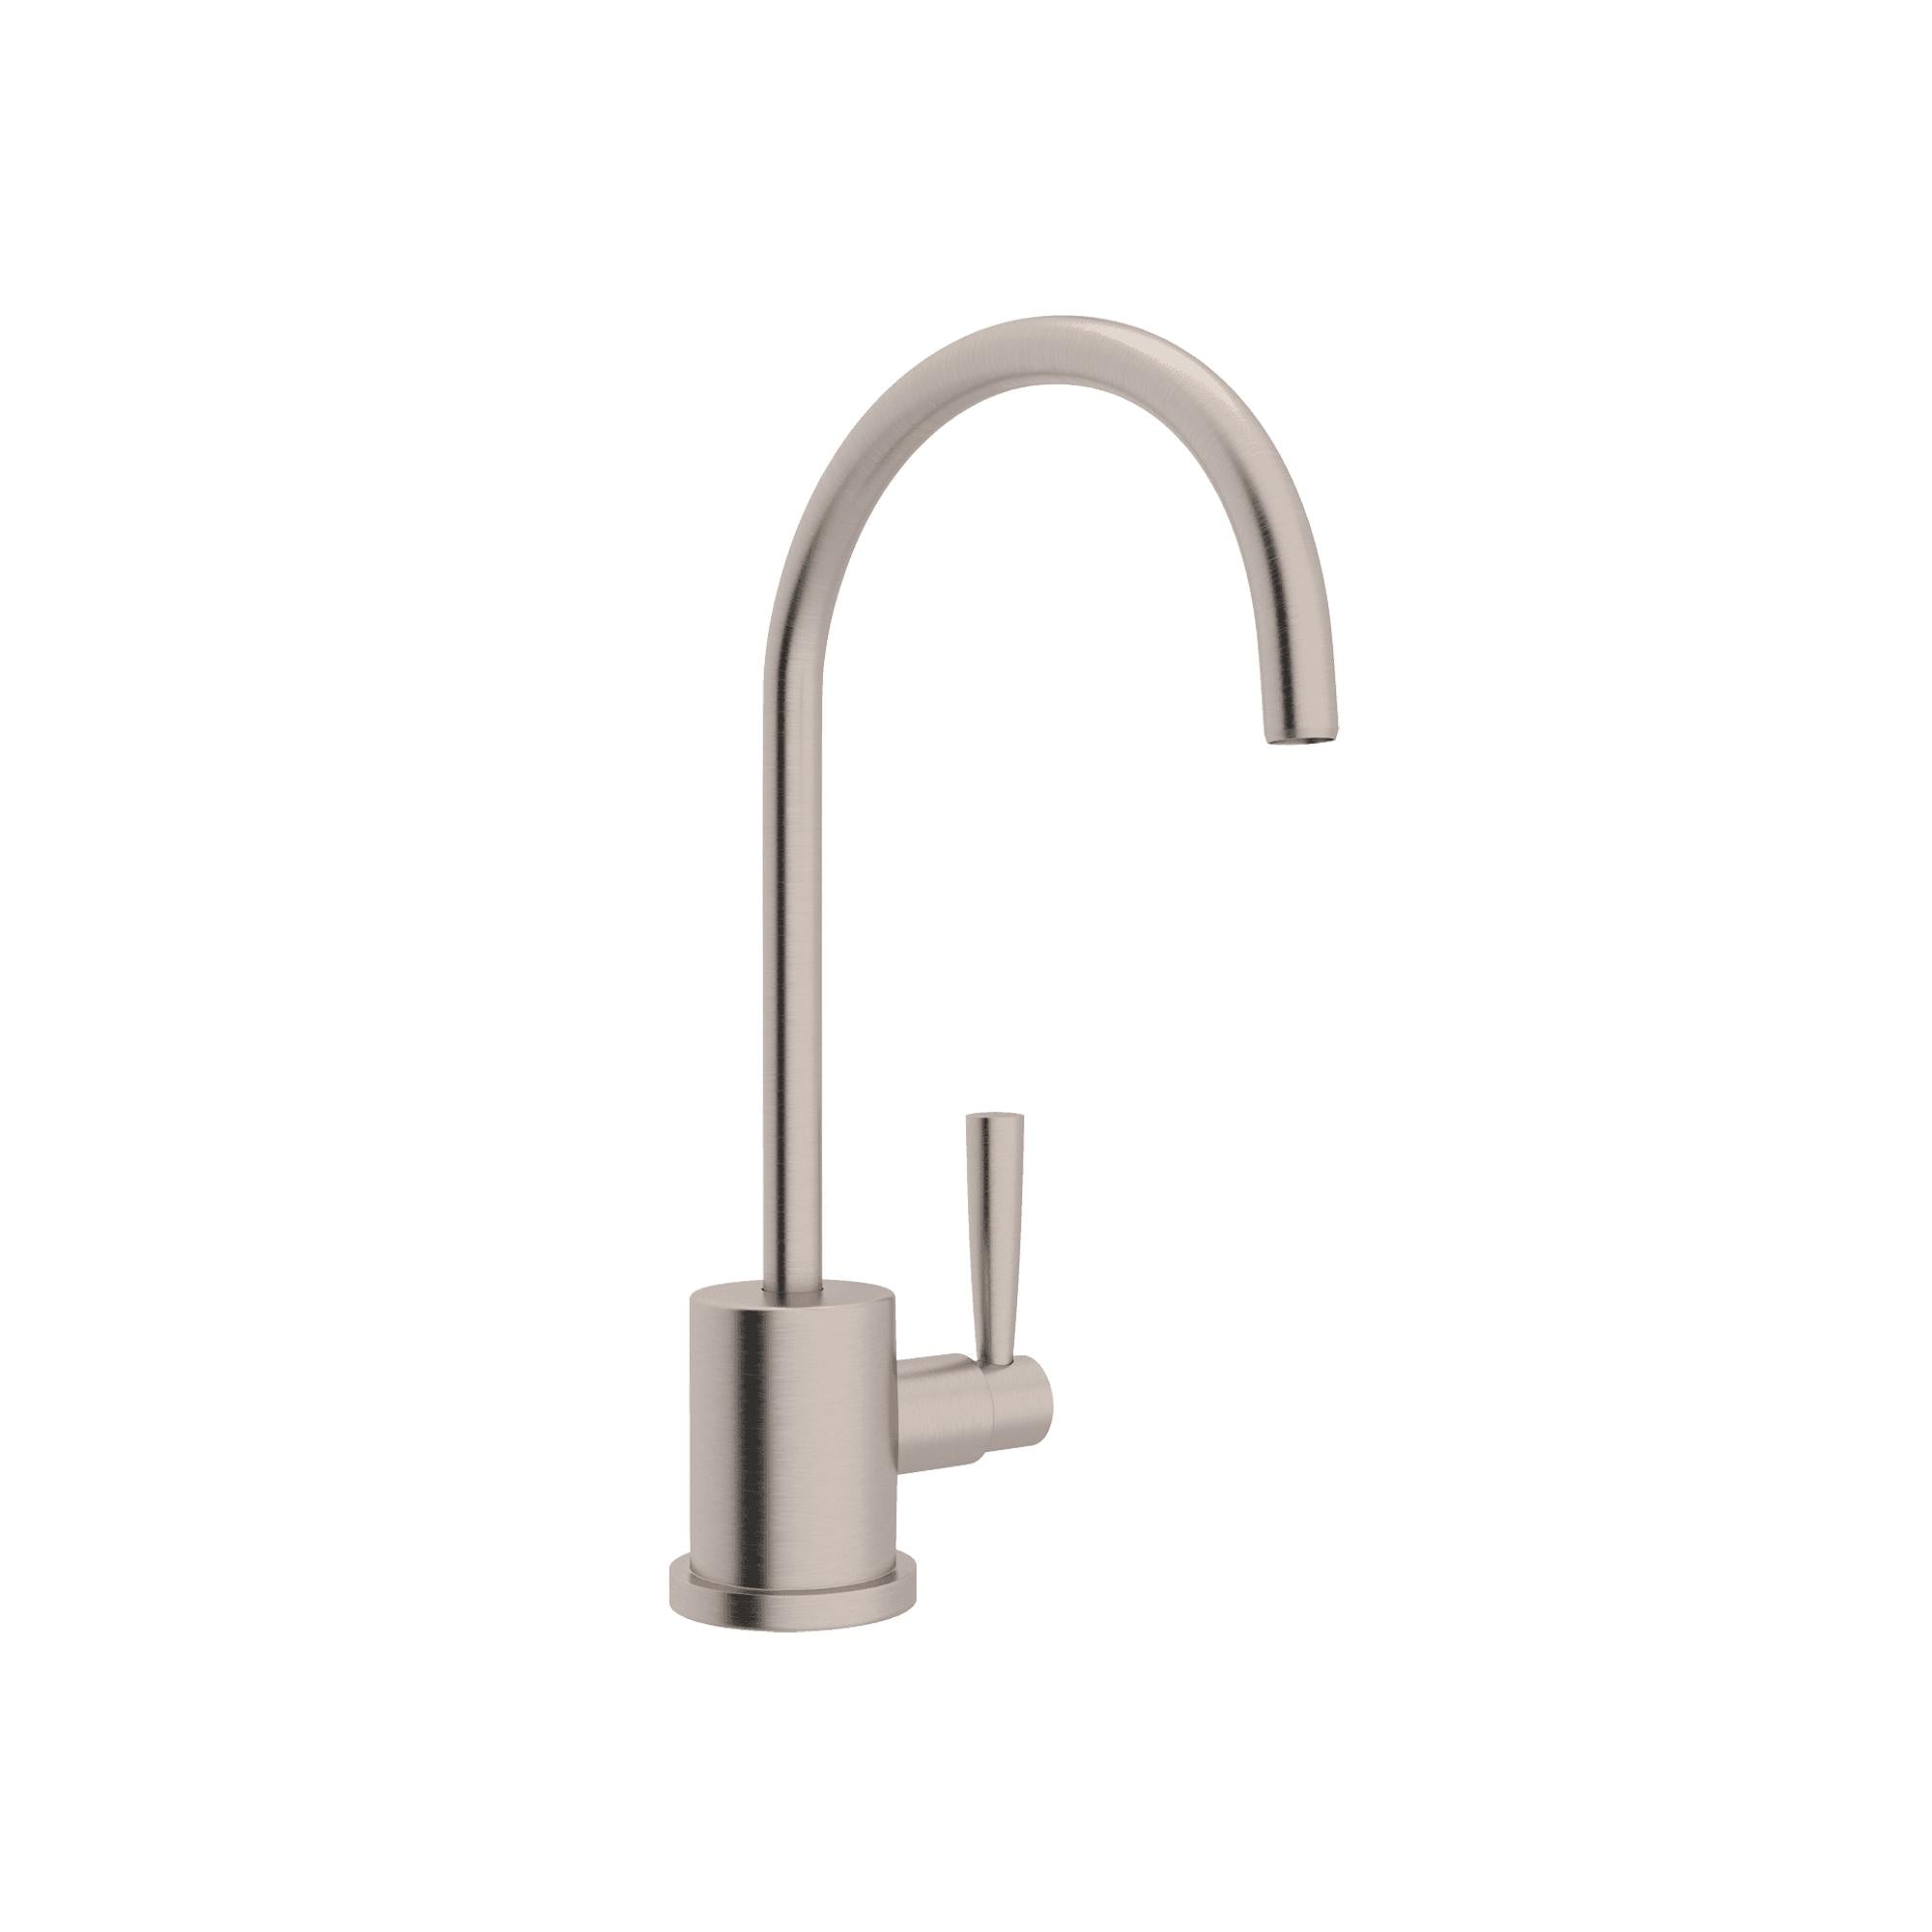 Perrin & Rowe U.1601 Holborn Filter Kitchen Faucet